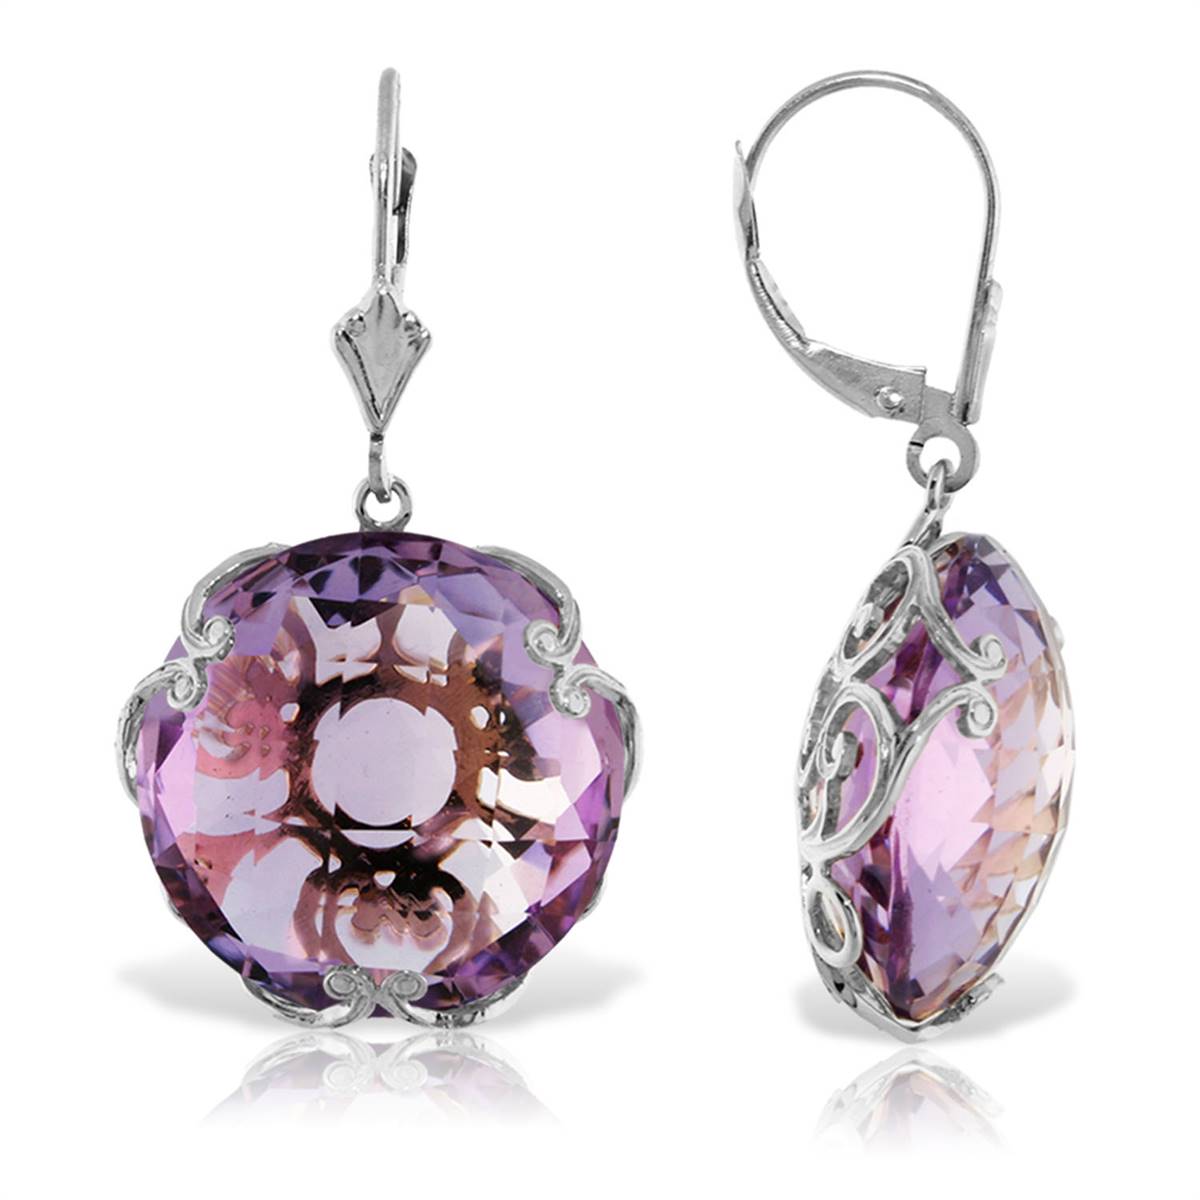 14K Solid White Gold Leverback Earrings Round Amethyst Jewelry